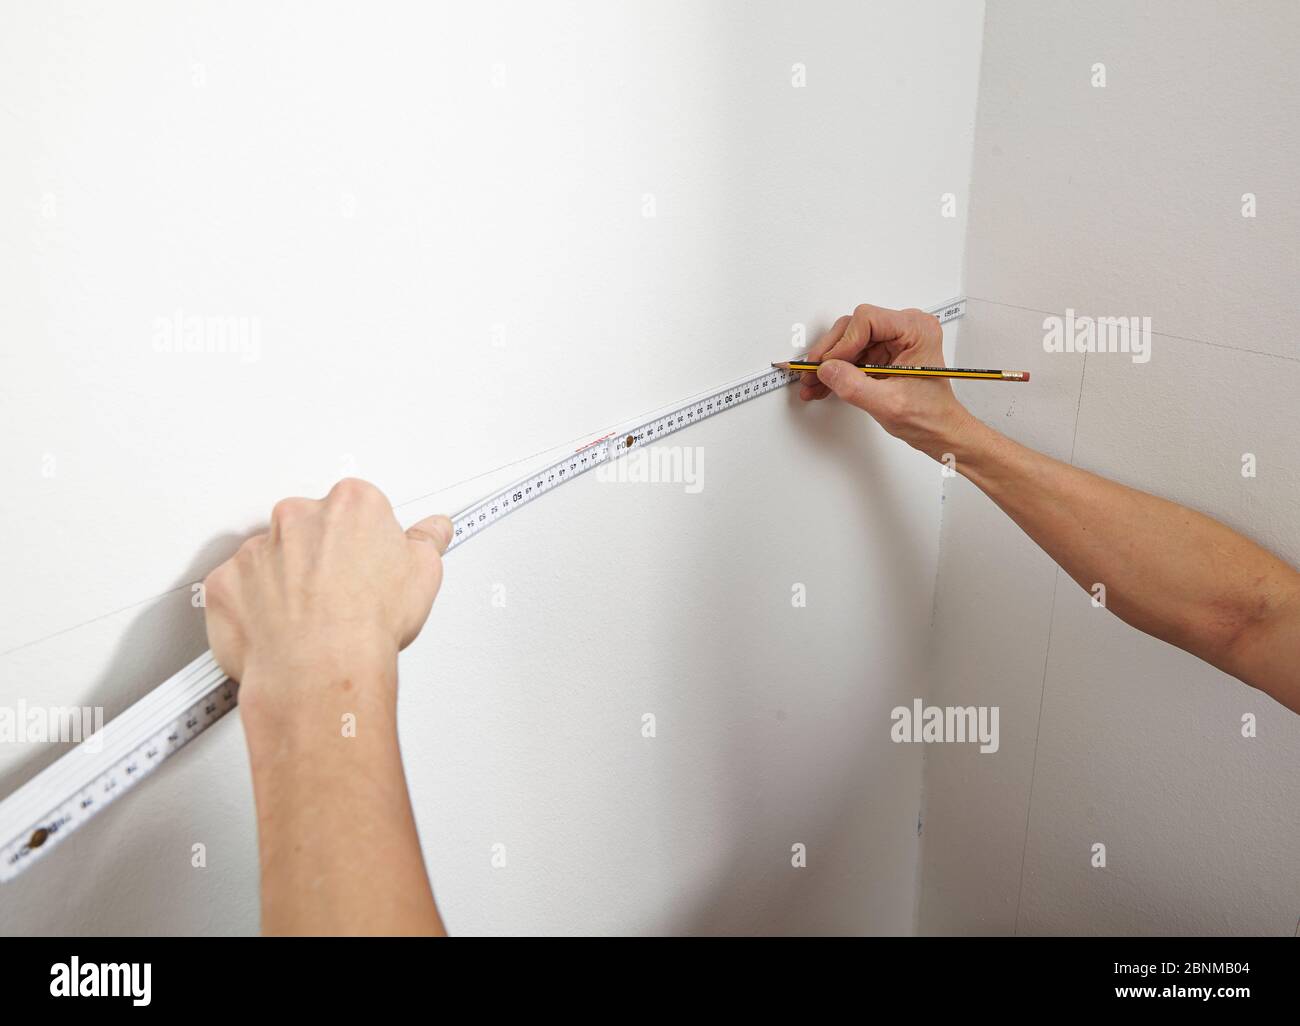 DIY wall design 01, step-by-step do-it-yourself production, vertical colored stripes in the lower wall area, step 01 measure and mark with pencil and ruler on the white painted wall Stock Photo